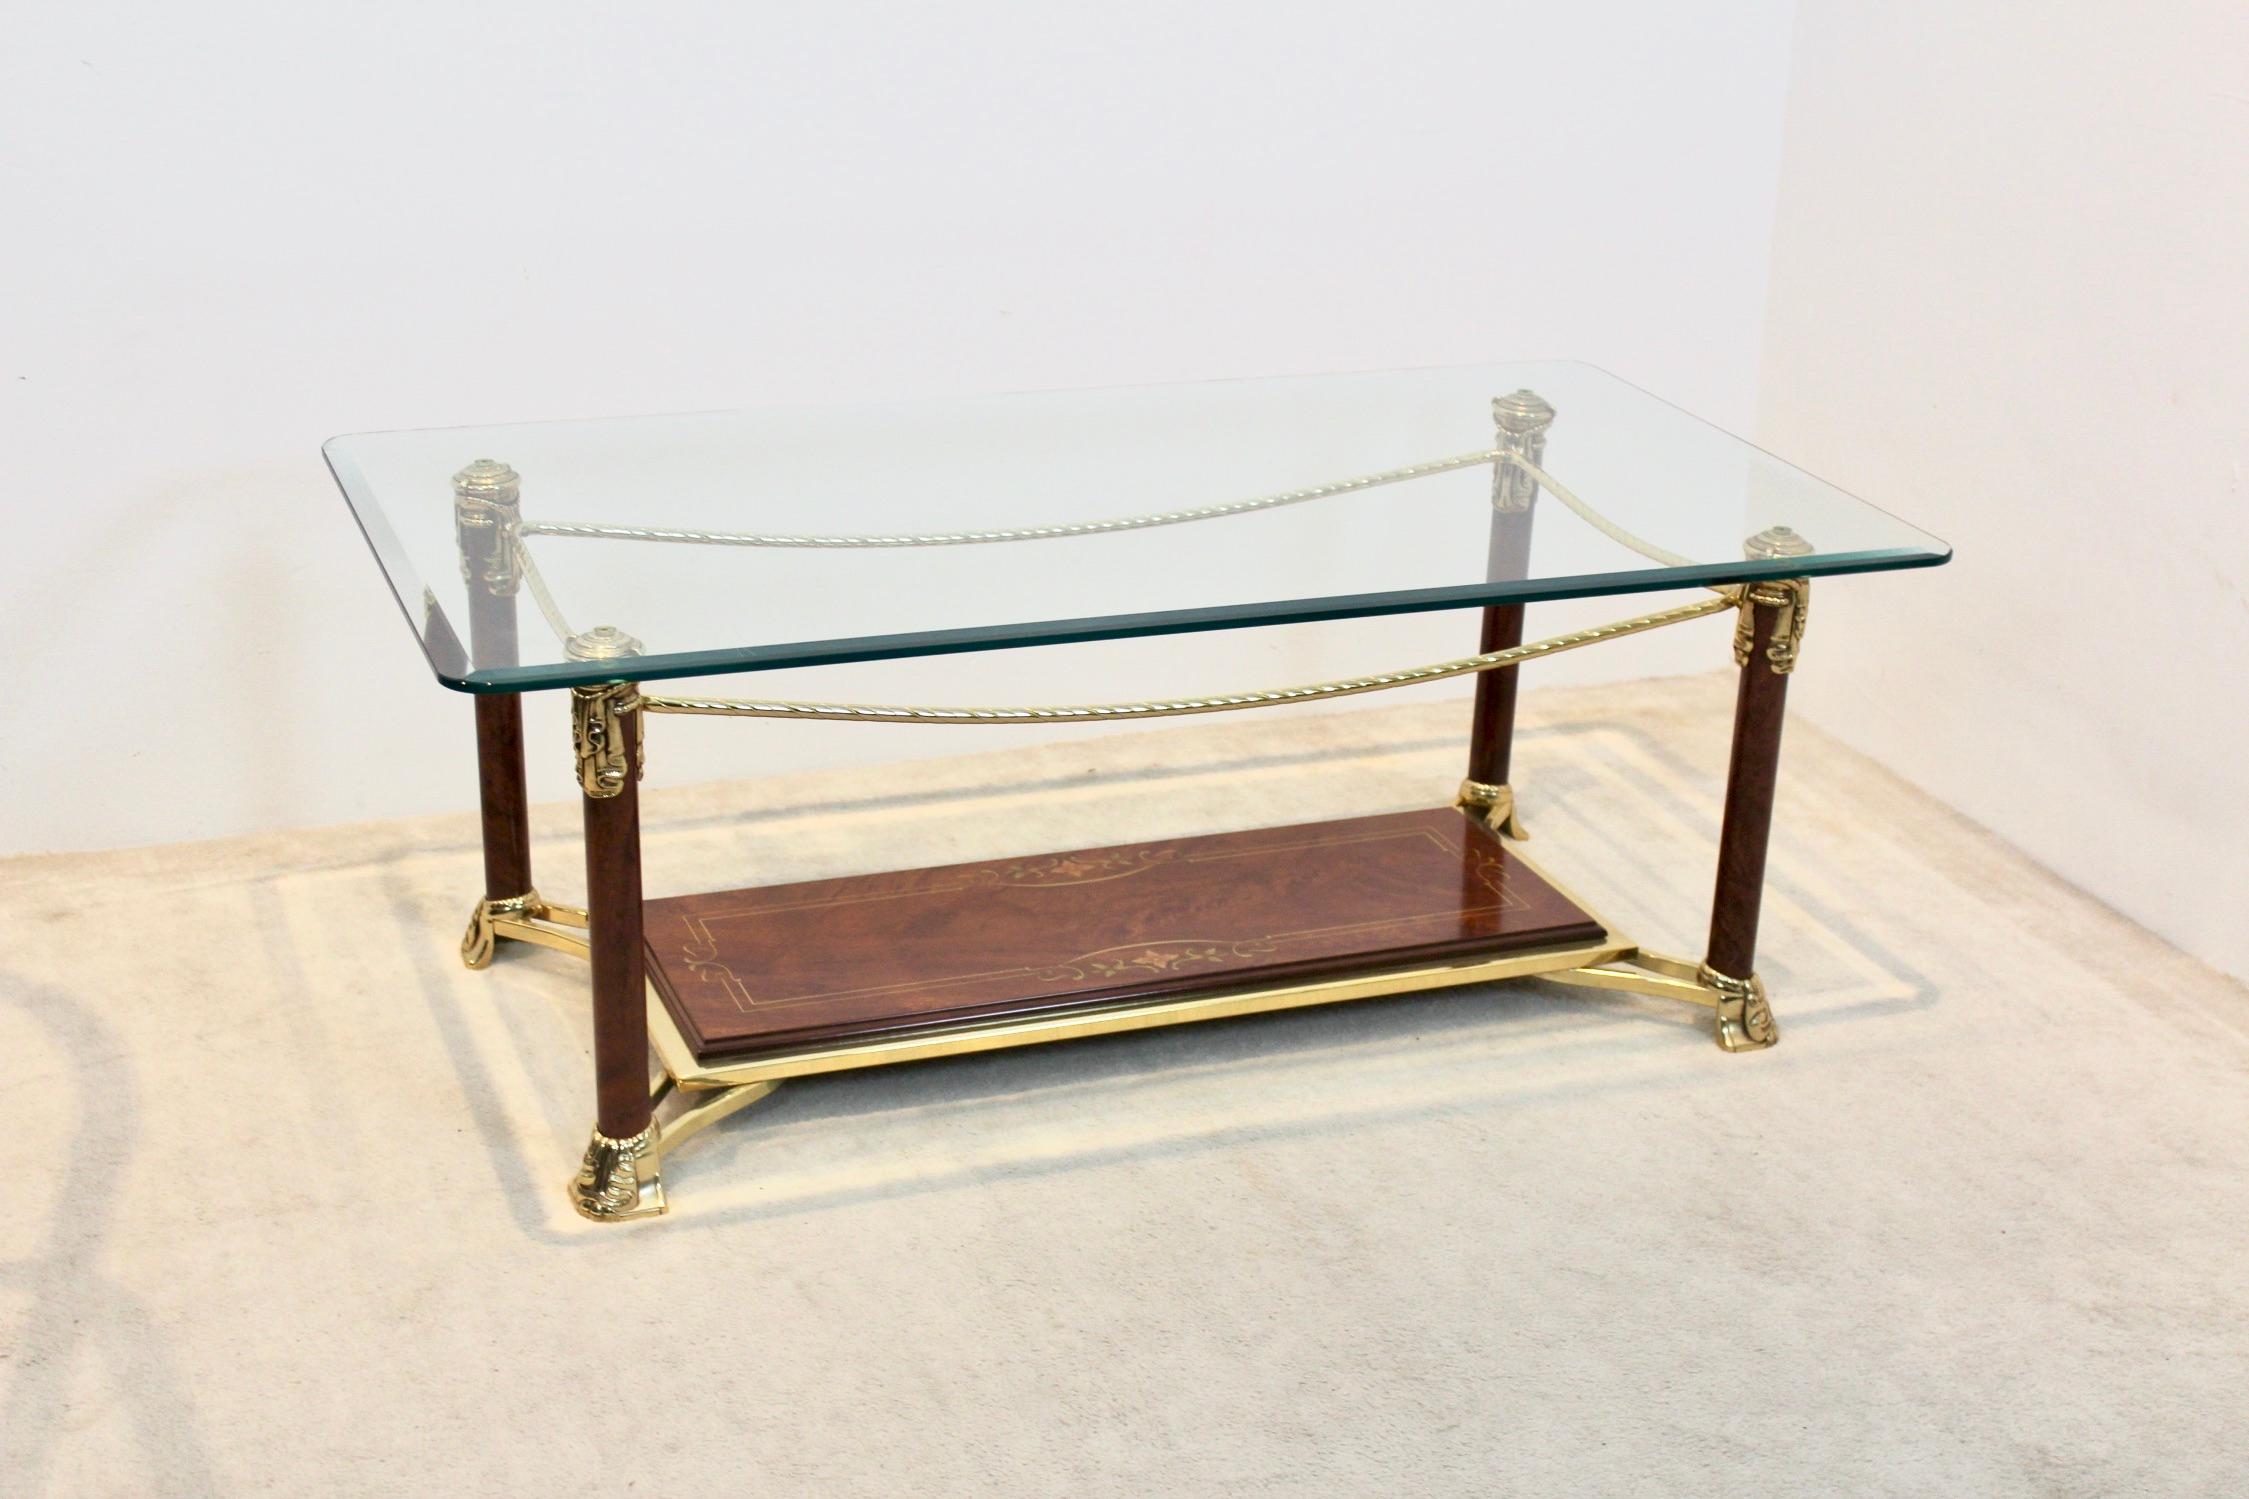 A truly beautiful brass and burr walnut coffee table with a solid glass top. In true Hollywood Regency manner this elegant Hollywood Regency style table has a unique cut-out rectangular design. Produced in France, circa 1970s. In very good